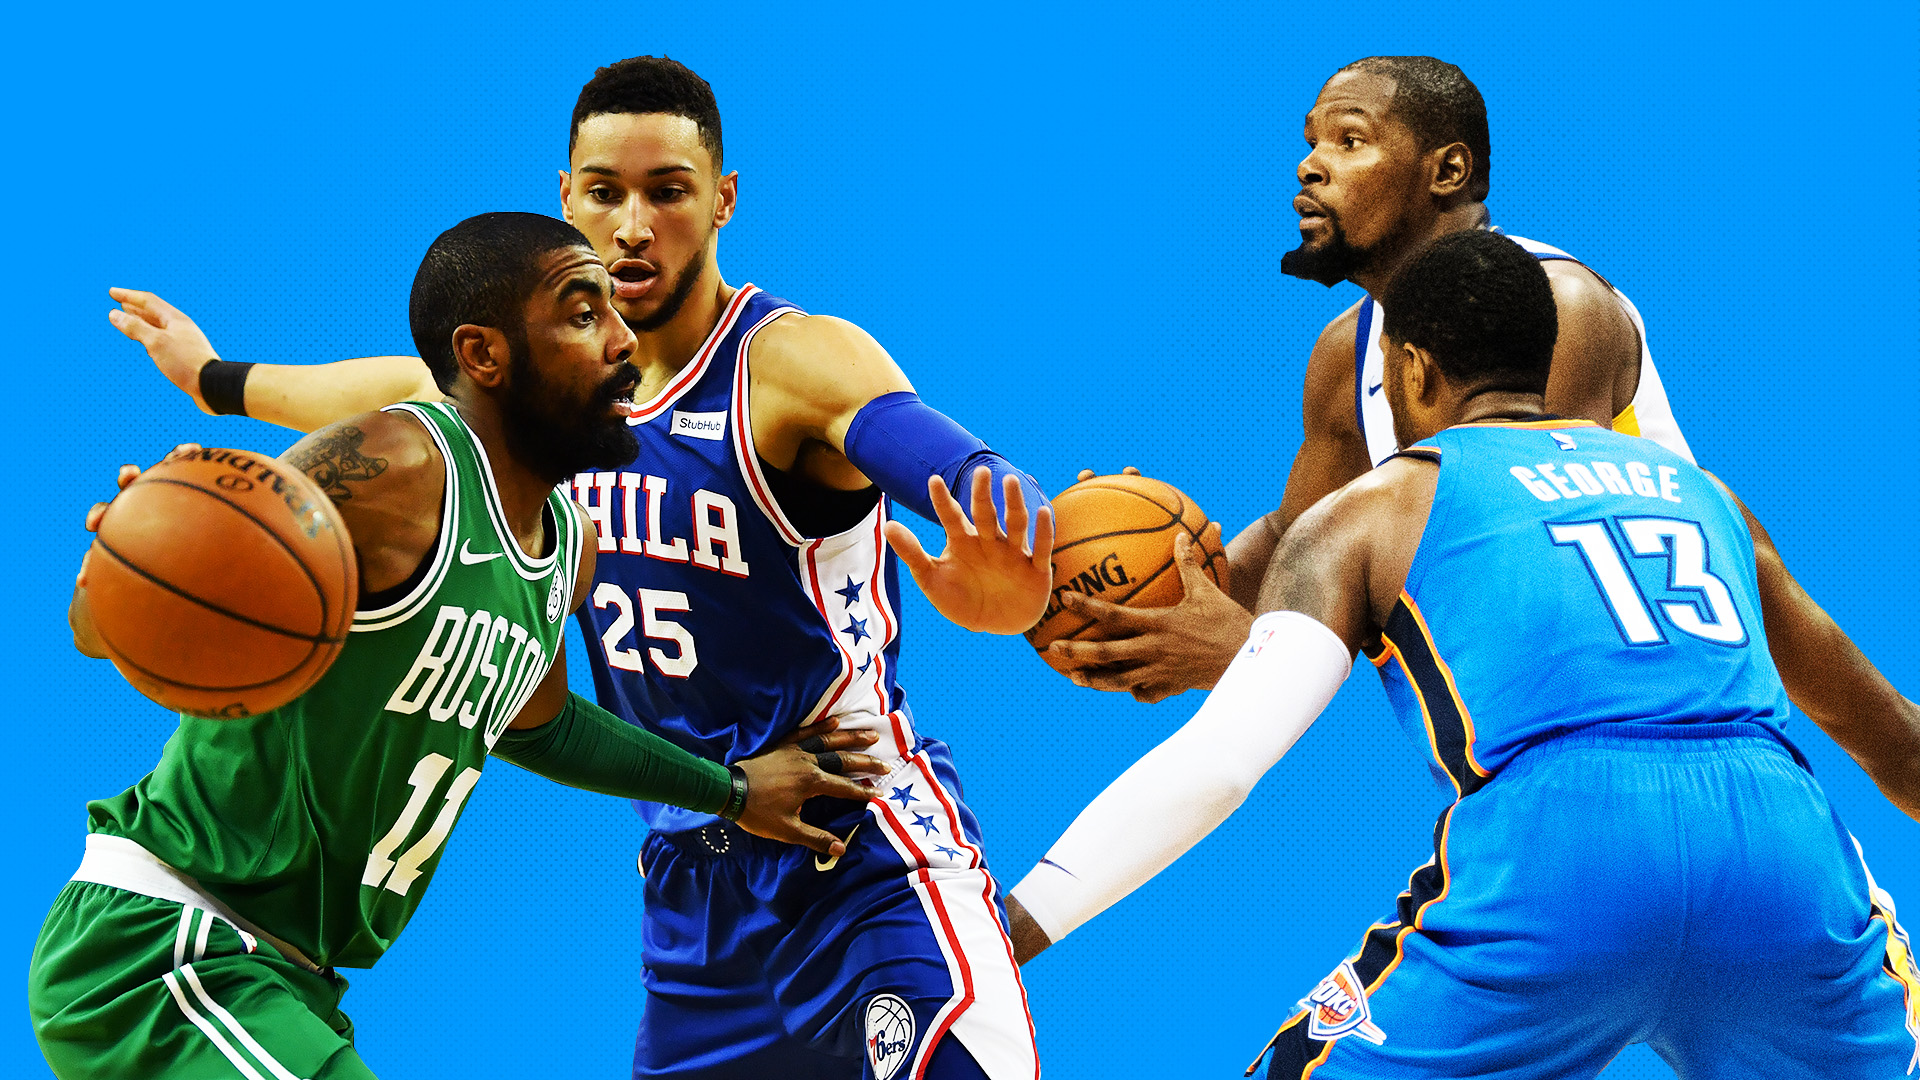 Opening Night Preview: What to watch in Celtics vs. 76ers, Warriors vs. Thunder | NBA ...1920 x 1080